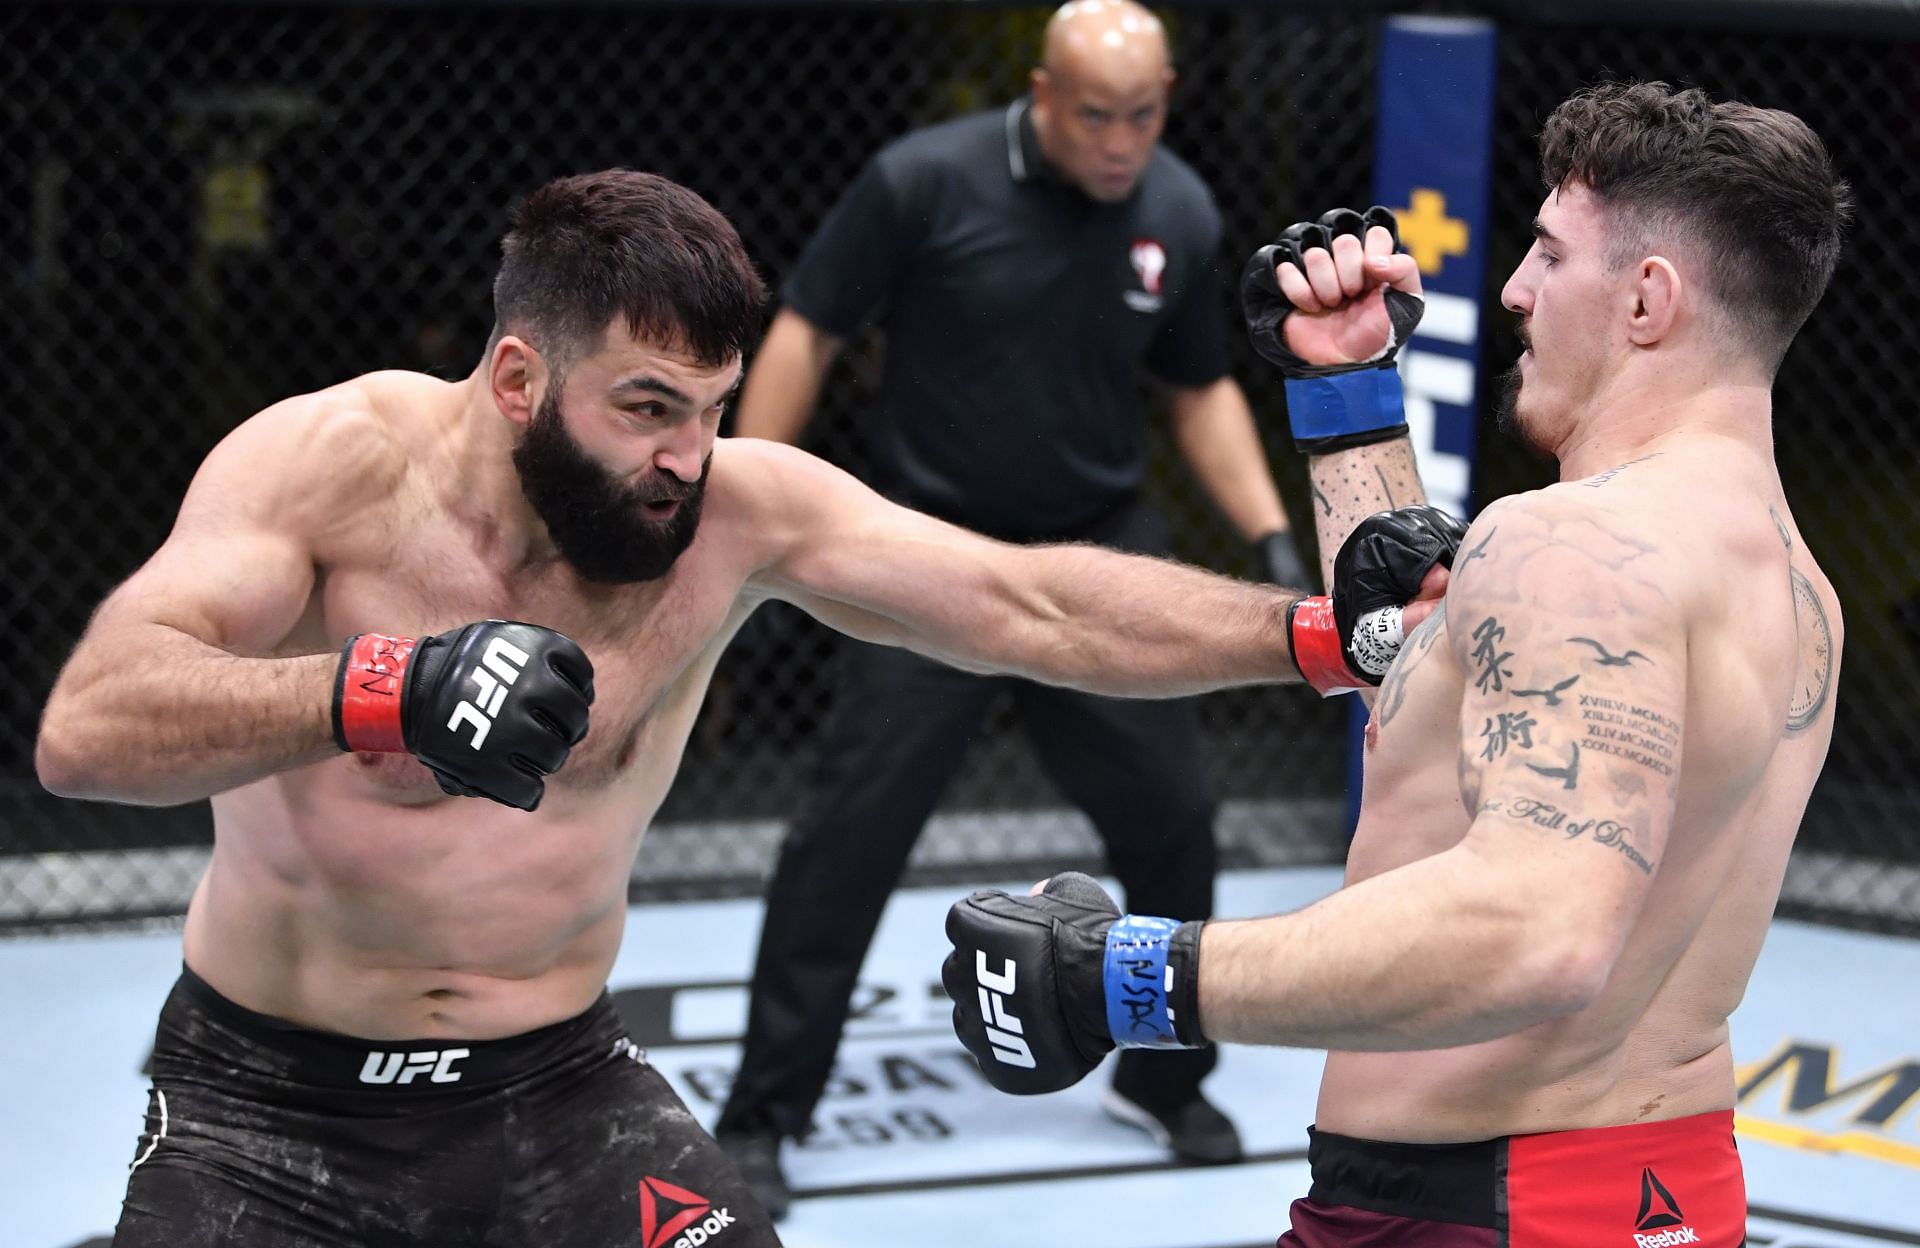 Arlovski has rebounded after losing five straight during 2016-2017